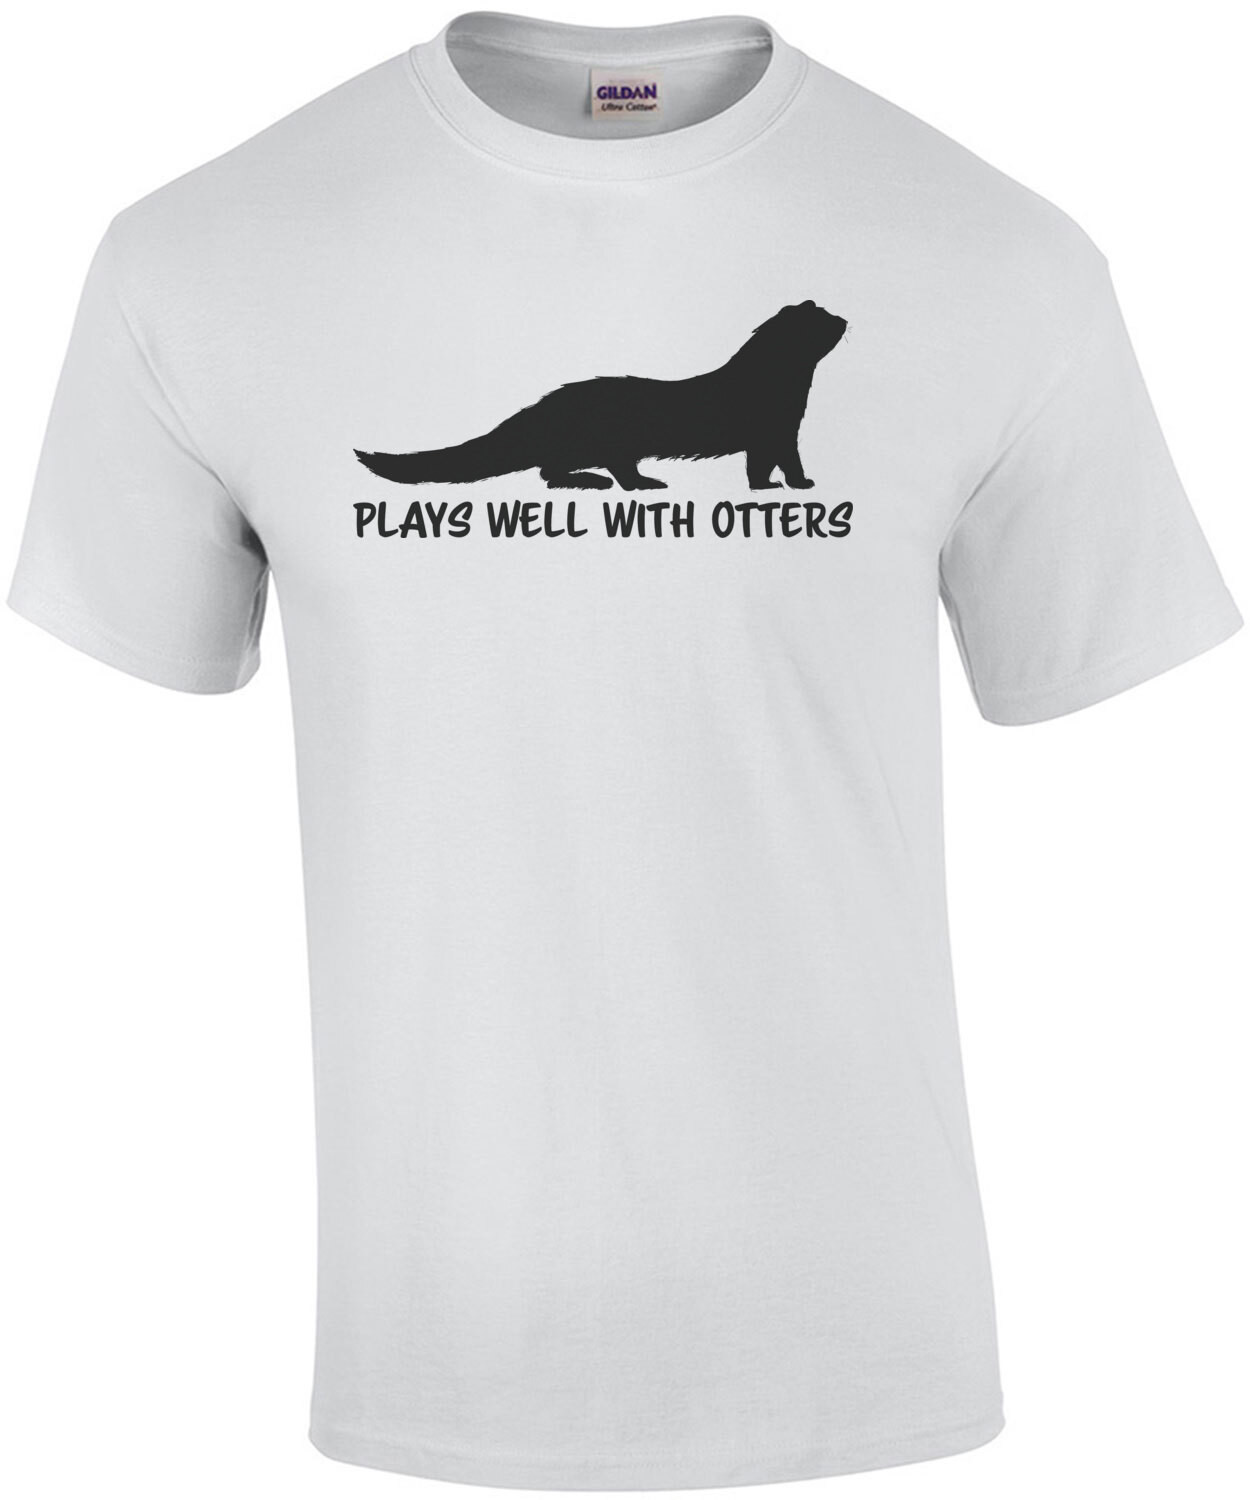 Plays well with otters - funny animal pun t-shirt